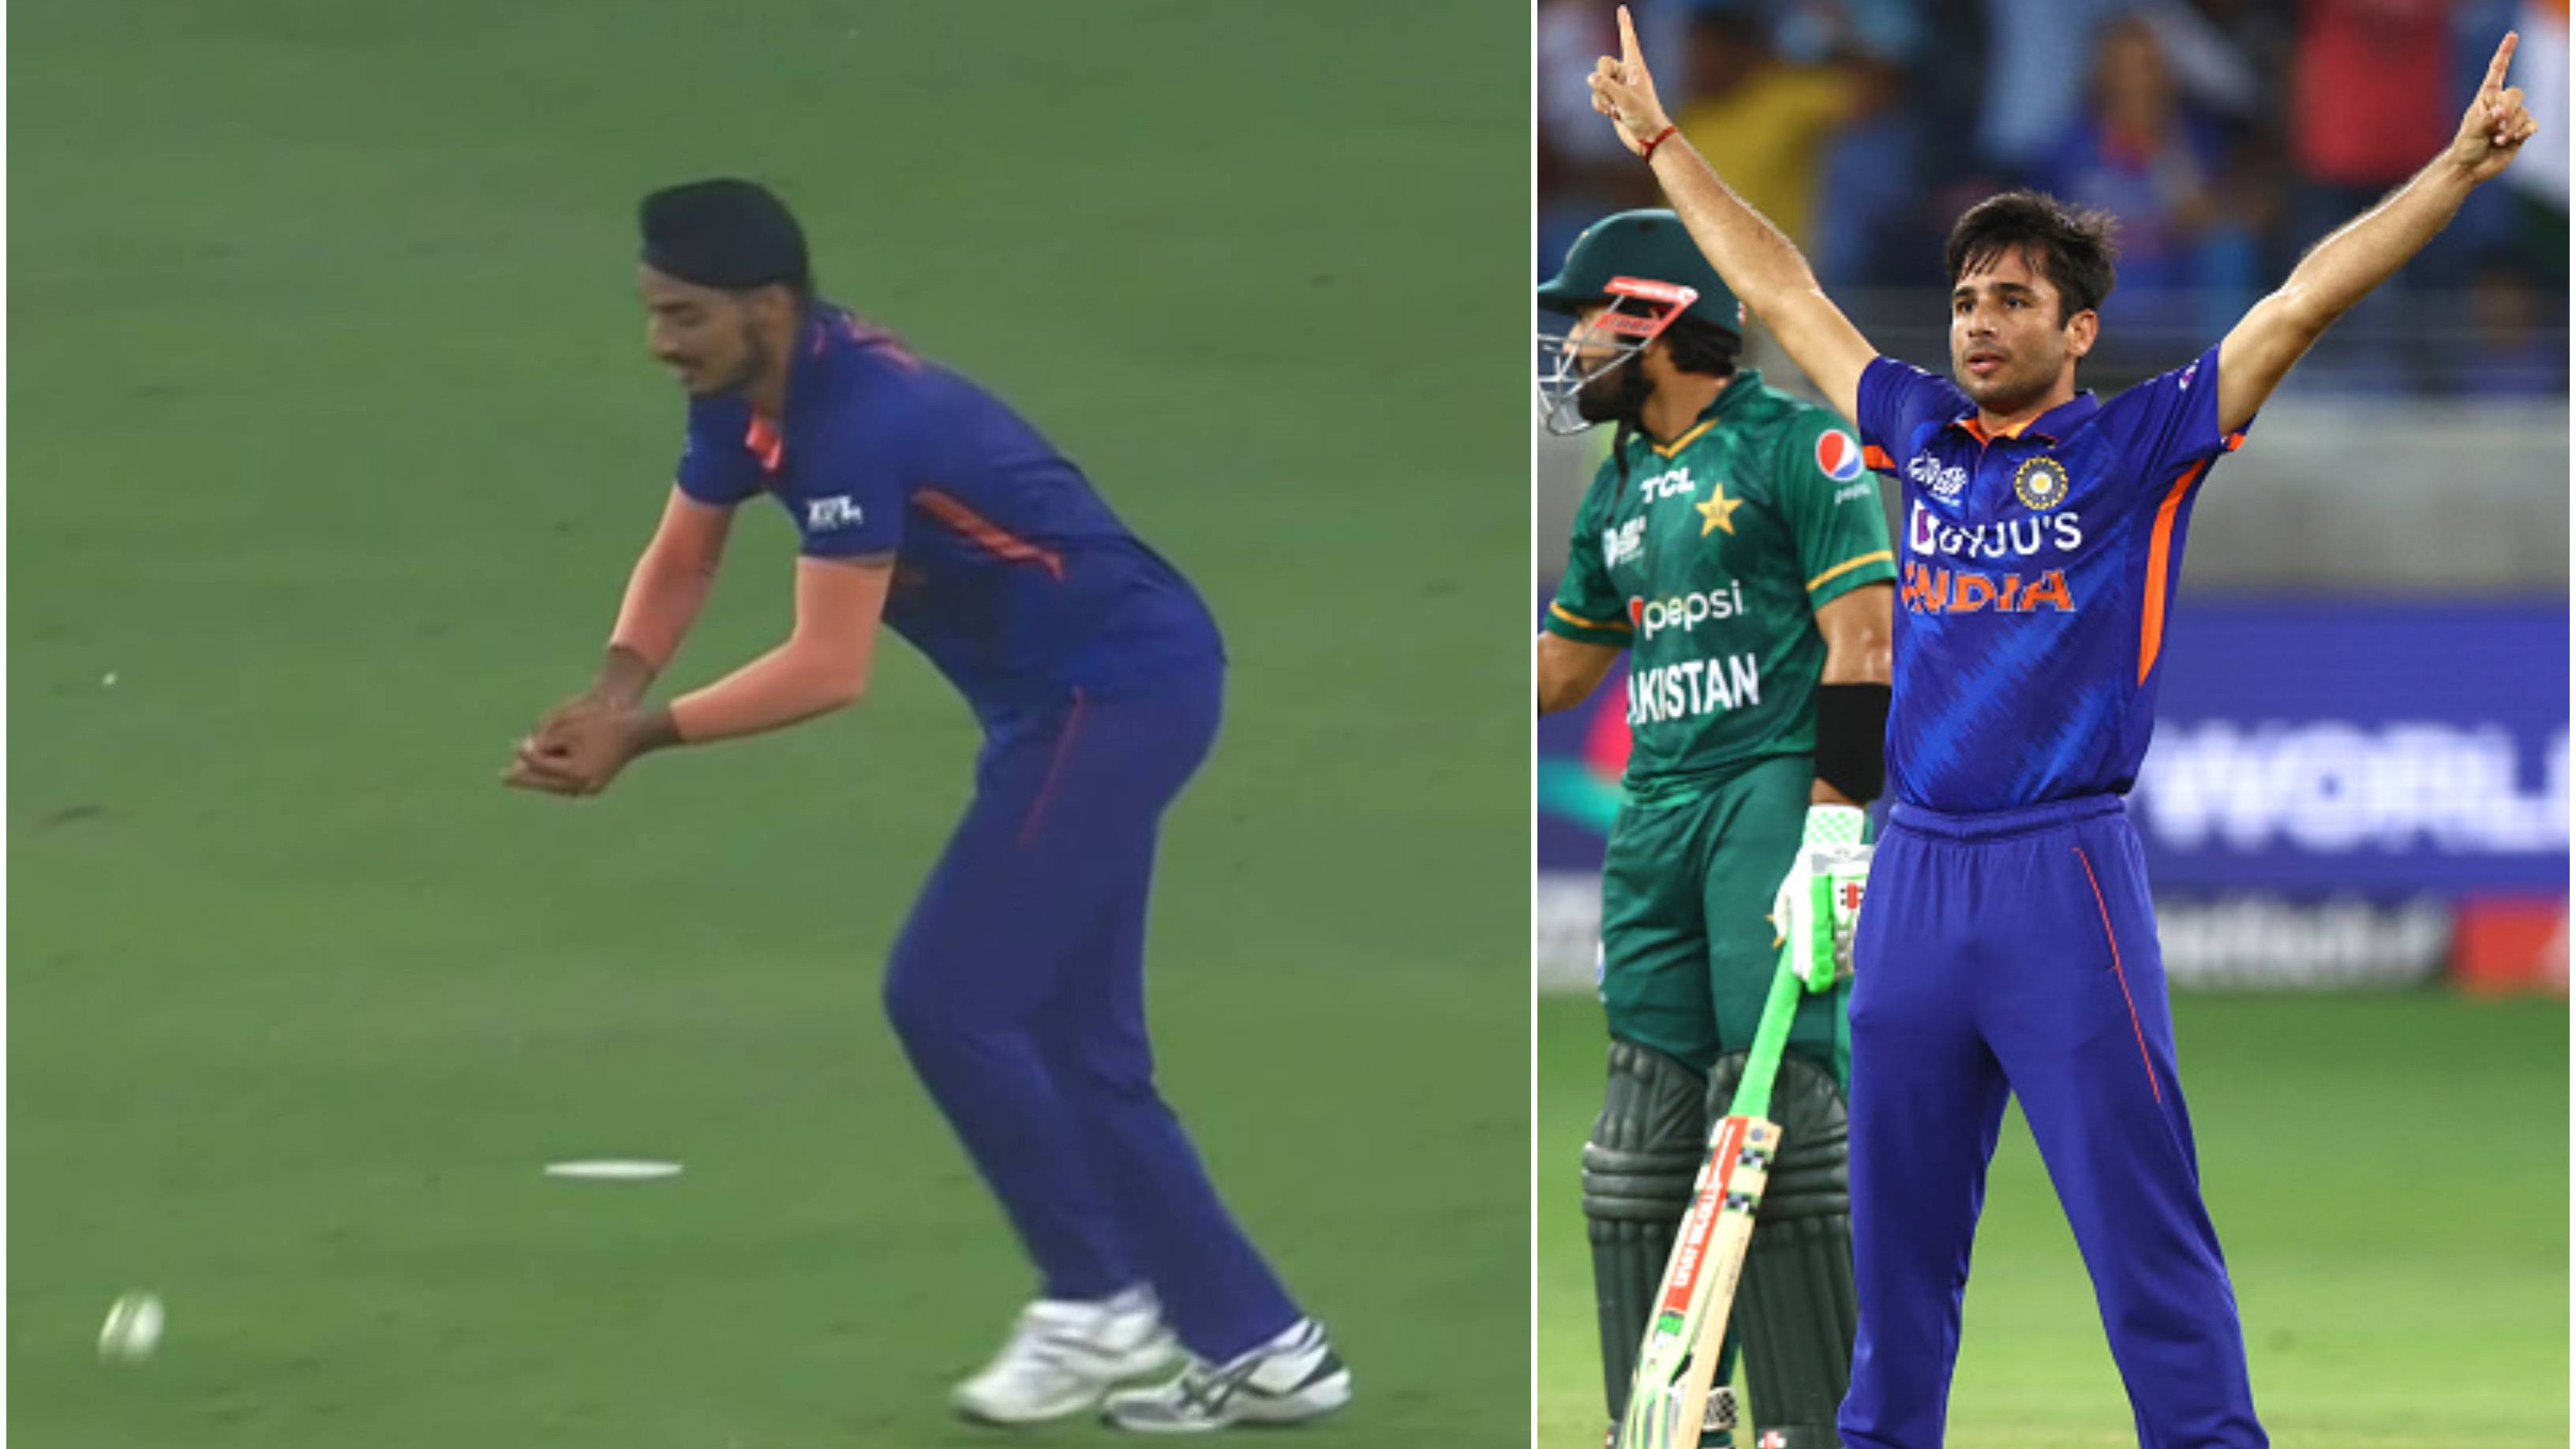 “It can happen with the best,” Ravi Bishnoi on Arshdeep Singh’s dropped catch against Pakistan in Asia Cup 2022